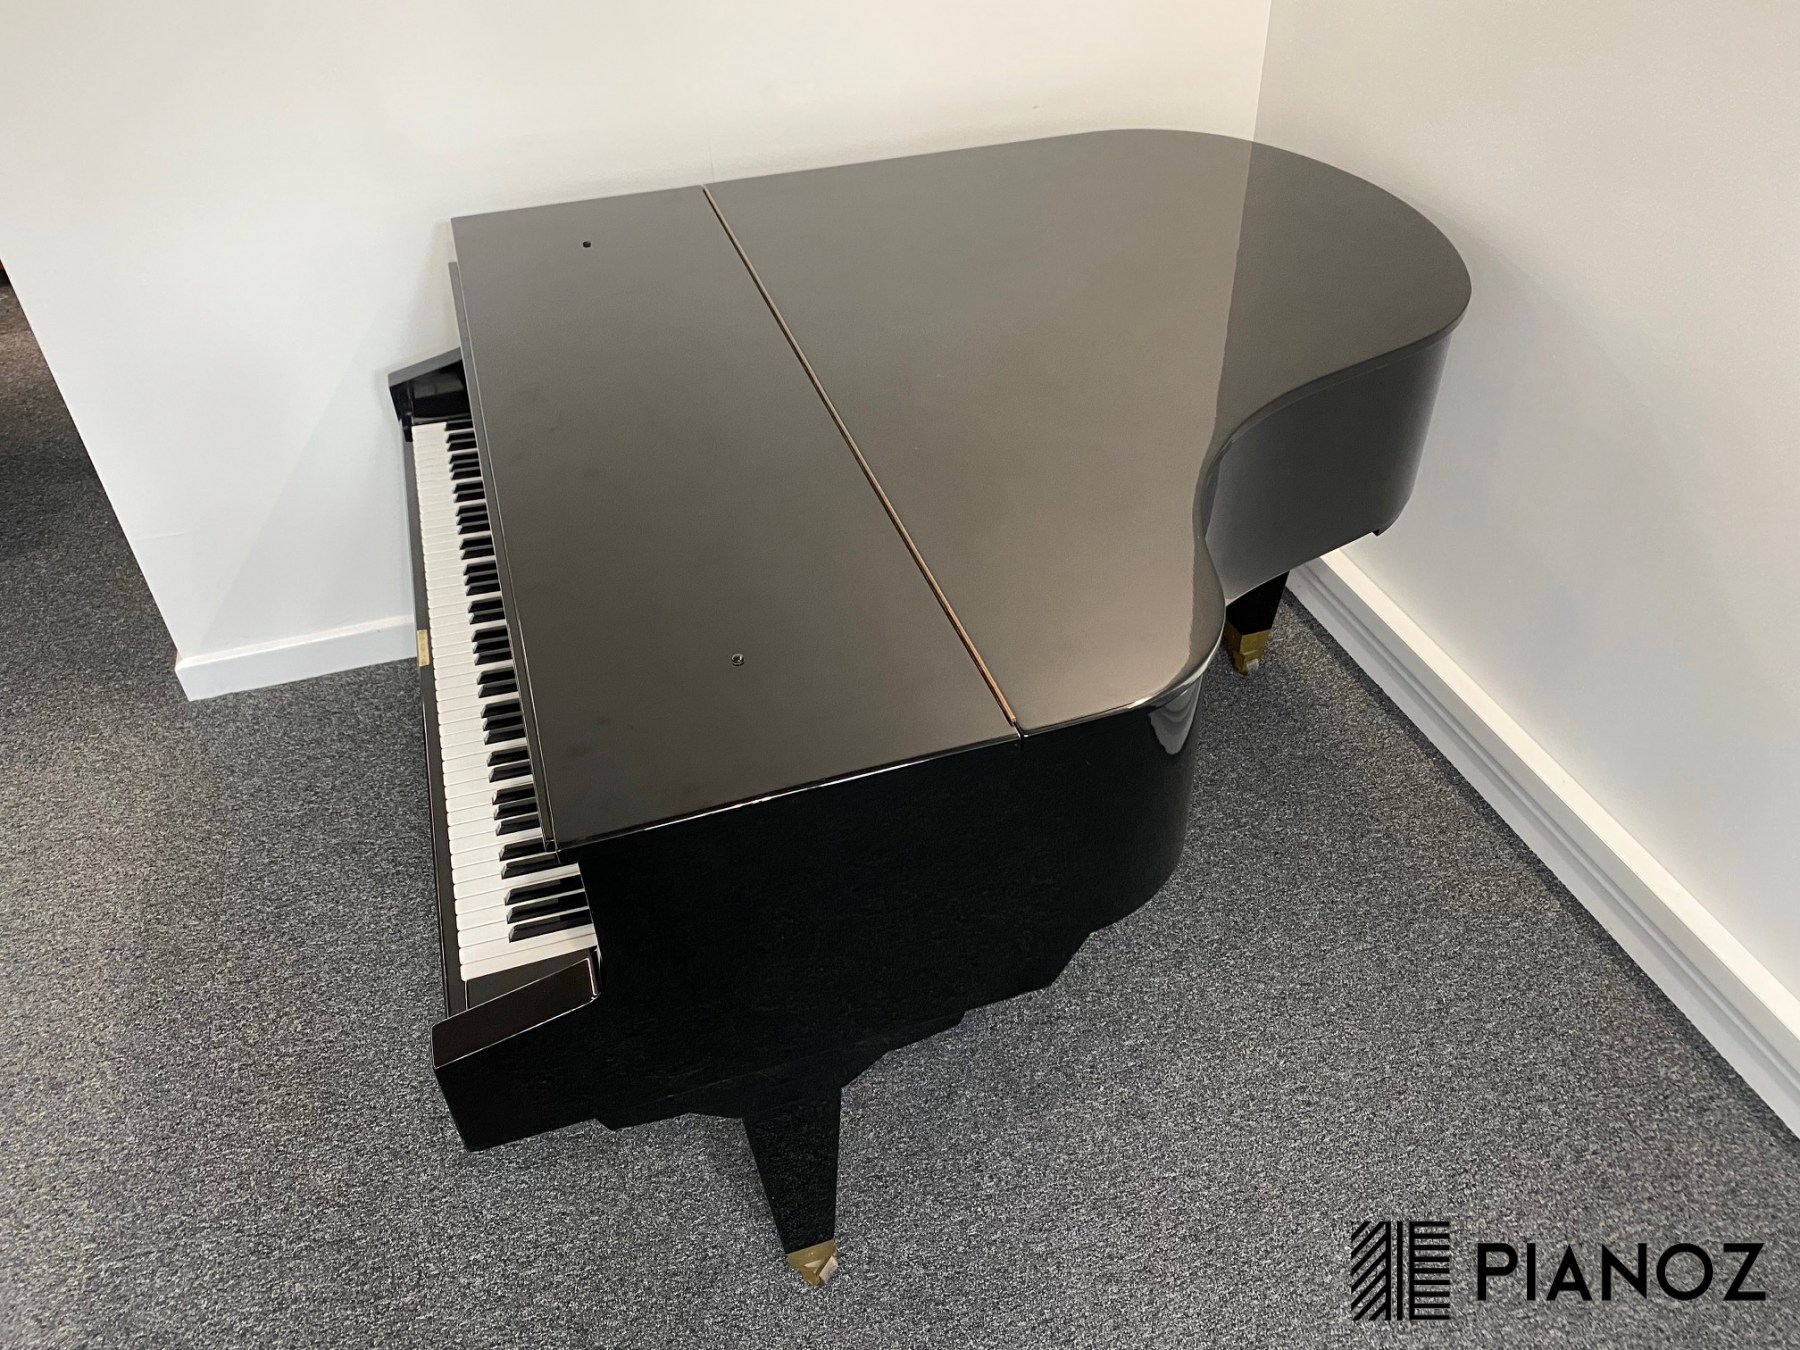 Neer Black High Gloss Baby Grand Piano piano for sale in UK